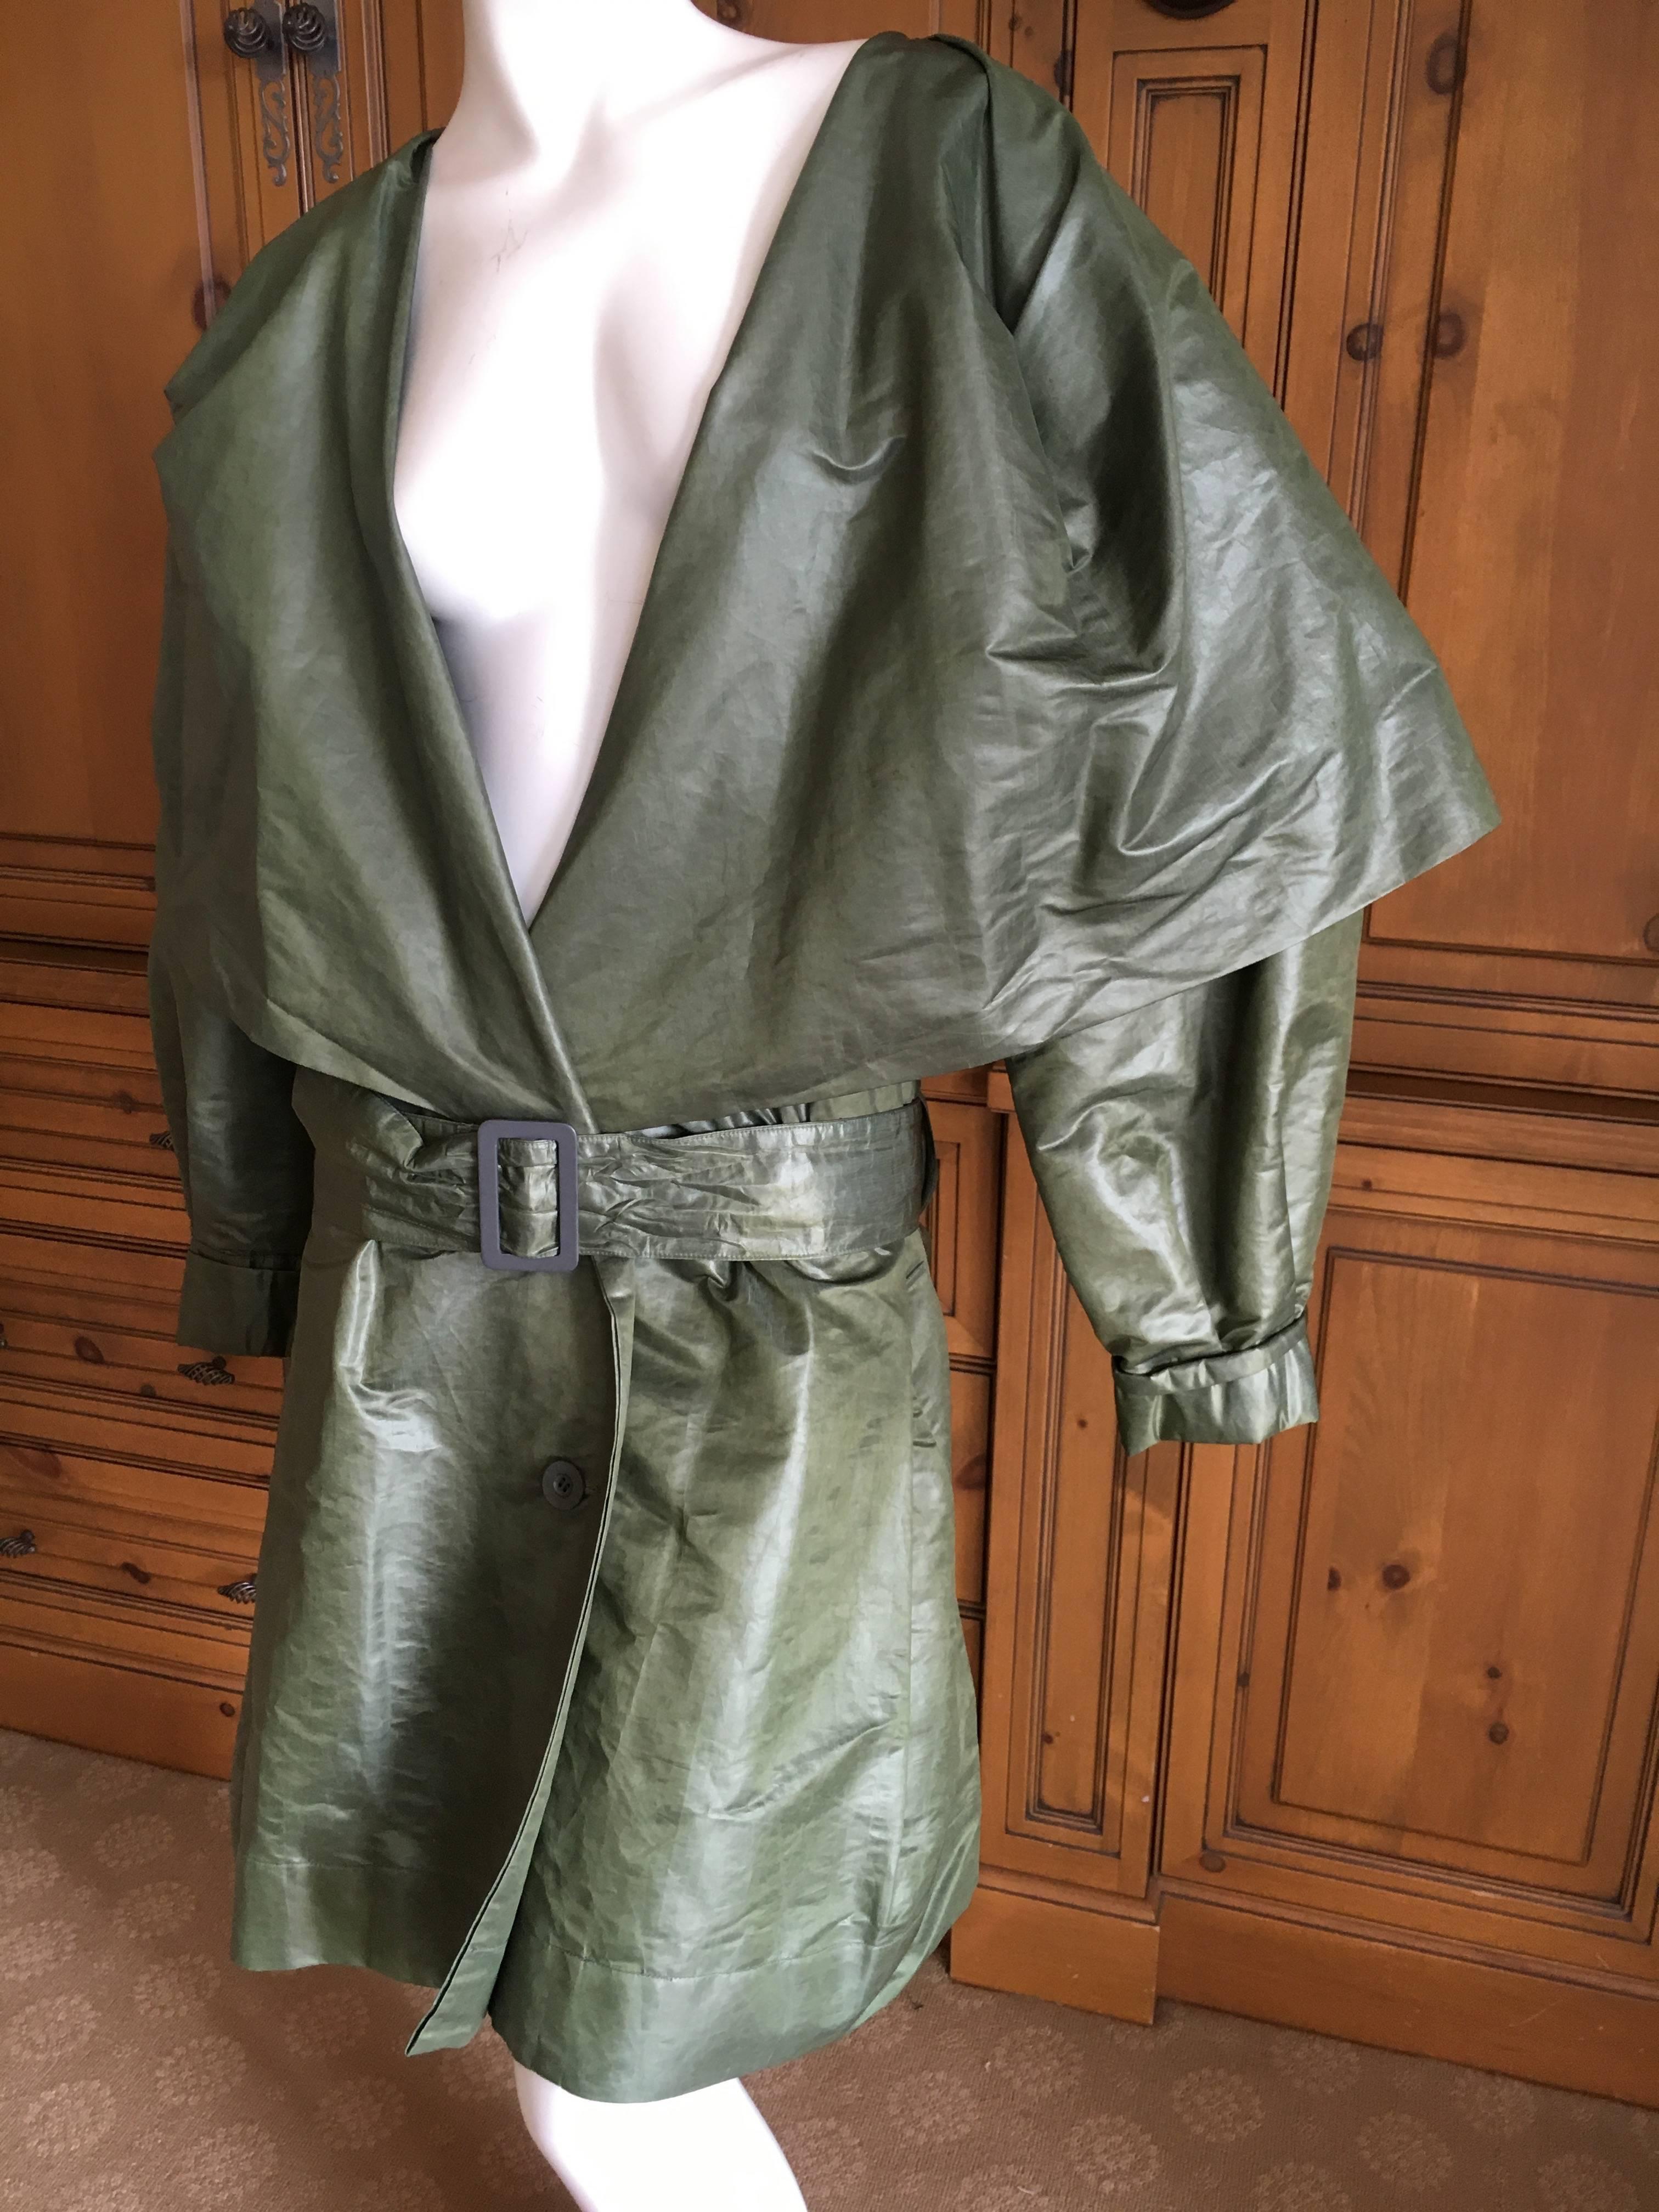 Early 1980's  Label Issey Miyake Belted Double Breasted Trench Coat with Cape Collar.
This is a treated, coated Poly fabric.
MArked size M, it is cut very generously.
Bust 62"
Waist 60"
Length 40"
